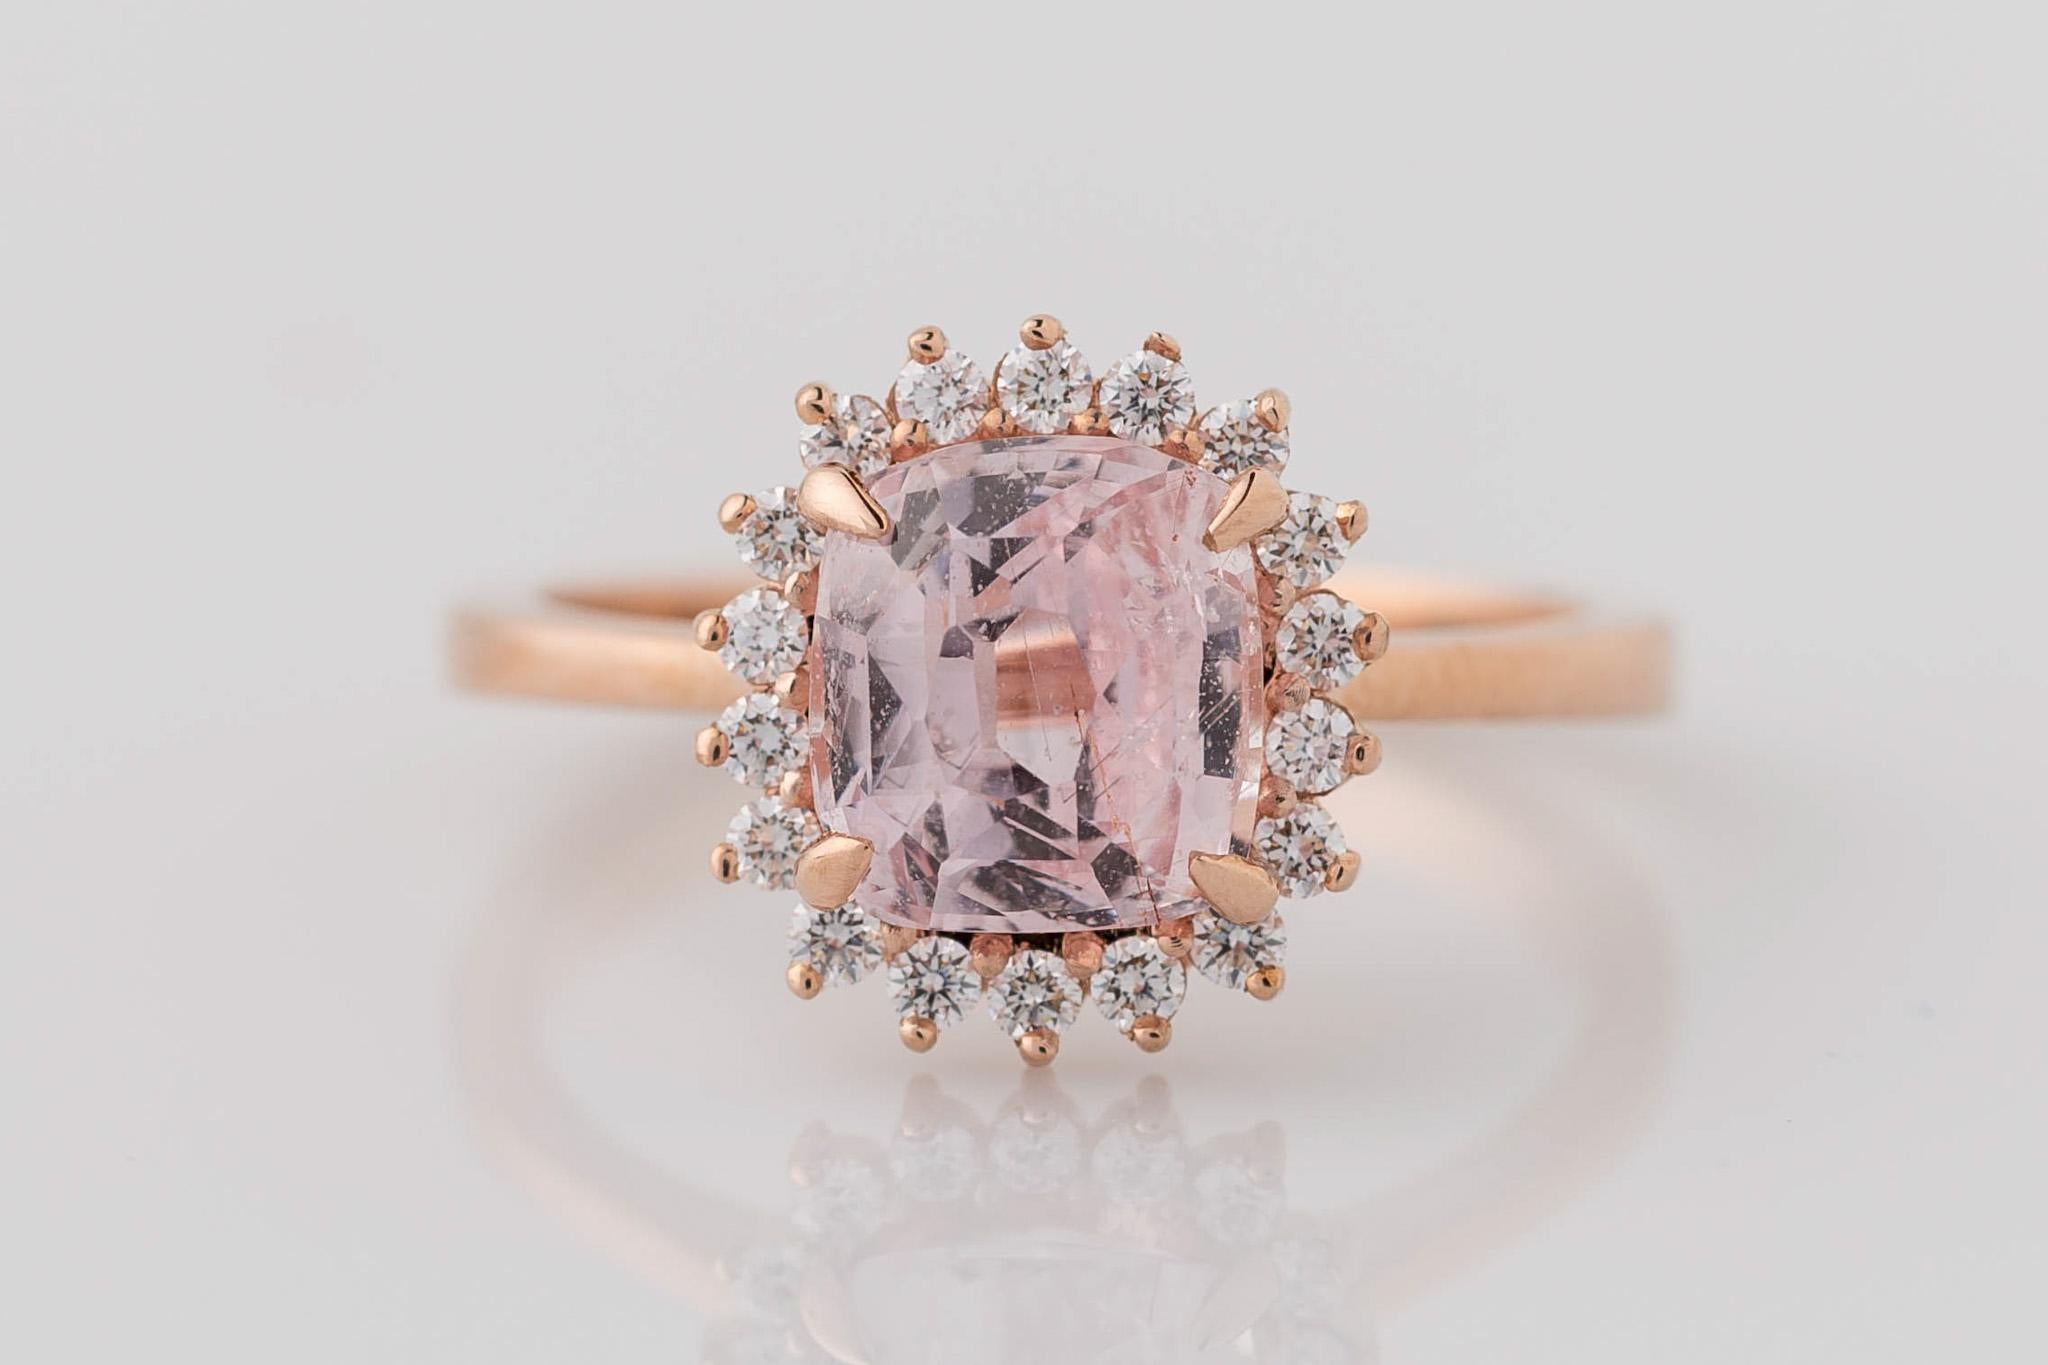 For Sale:  GIA Certified 2.46 Carat Cushion Pink Sapphire Diamond Halo Engagement Ring. 2